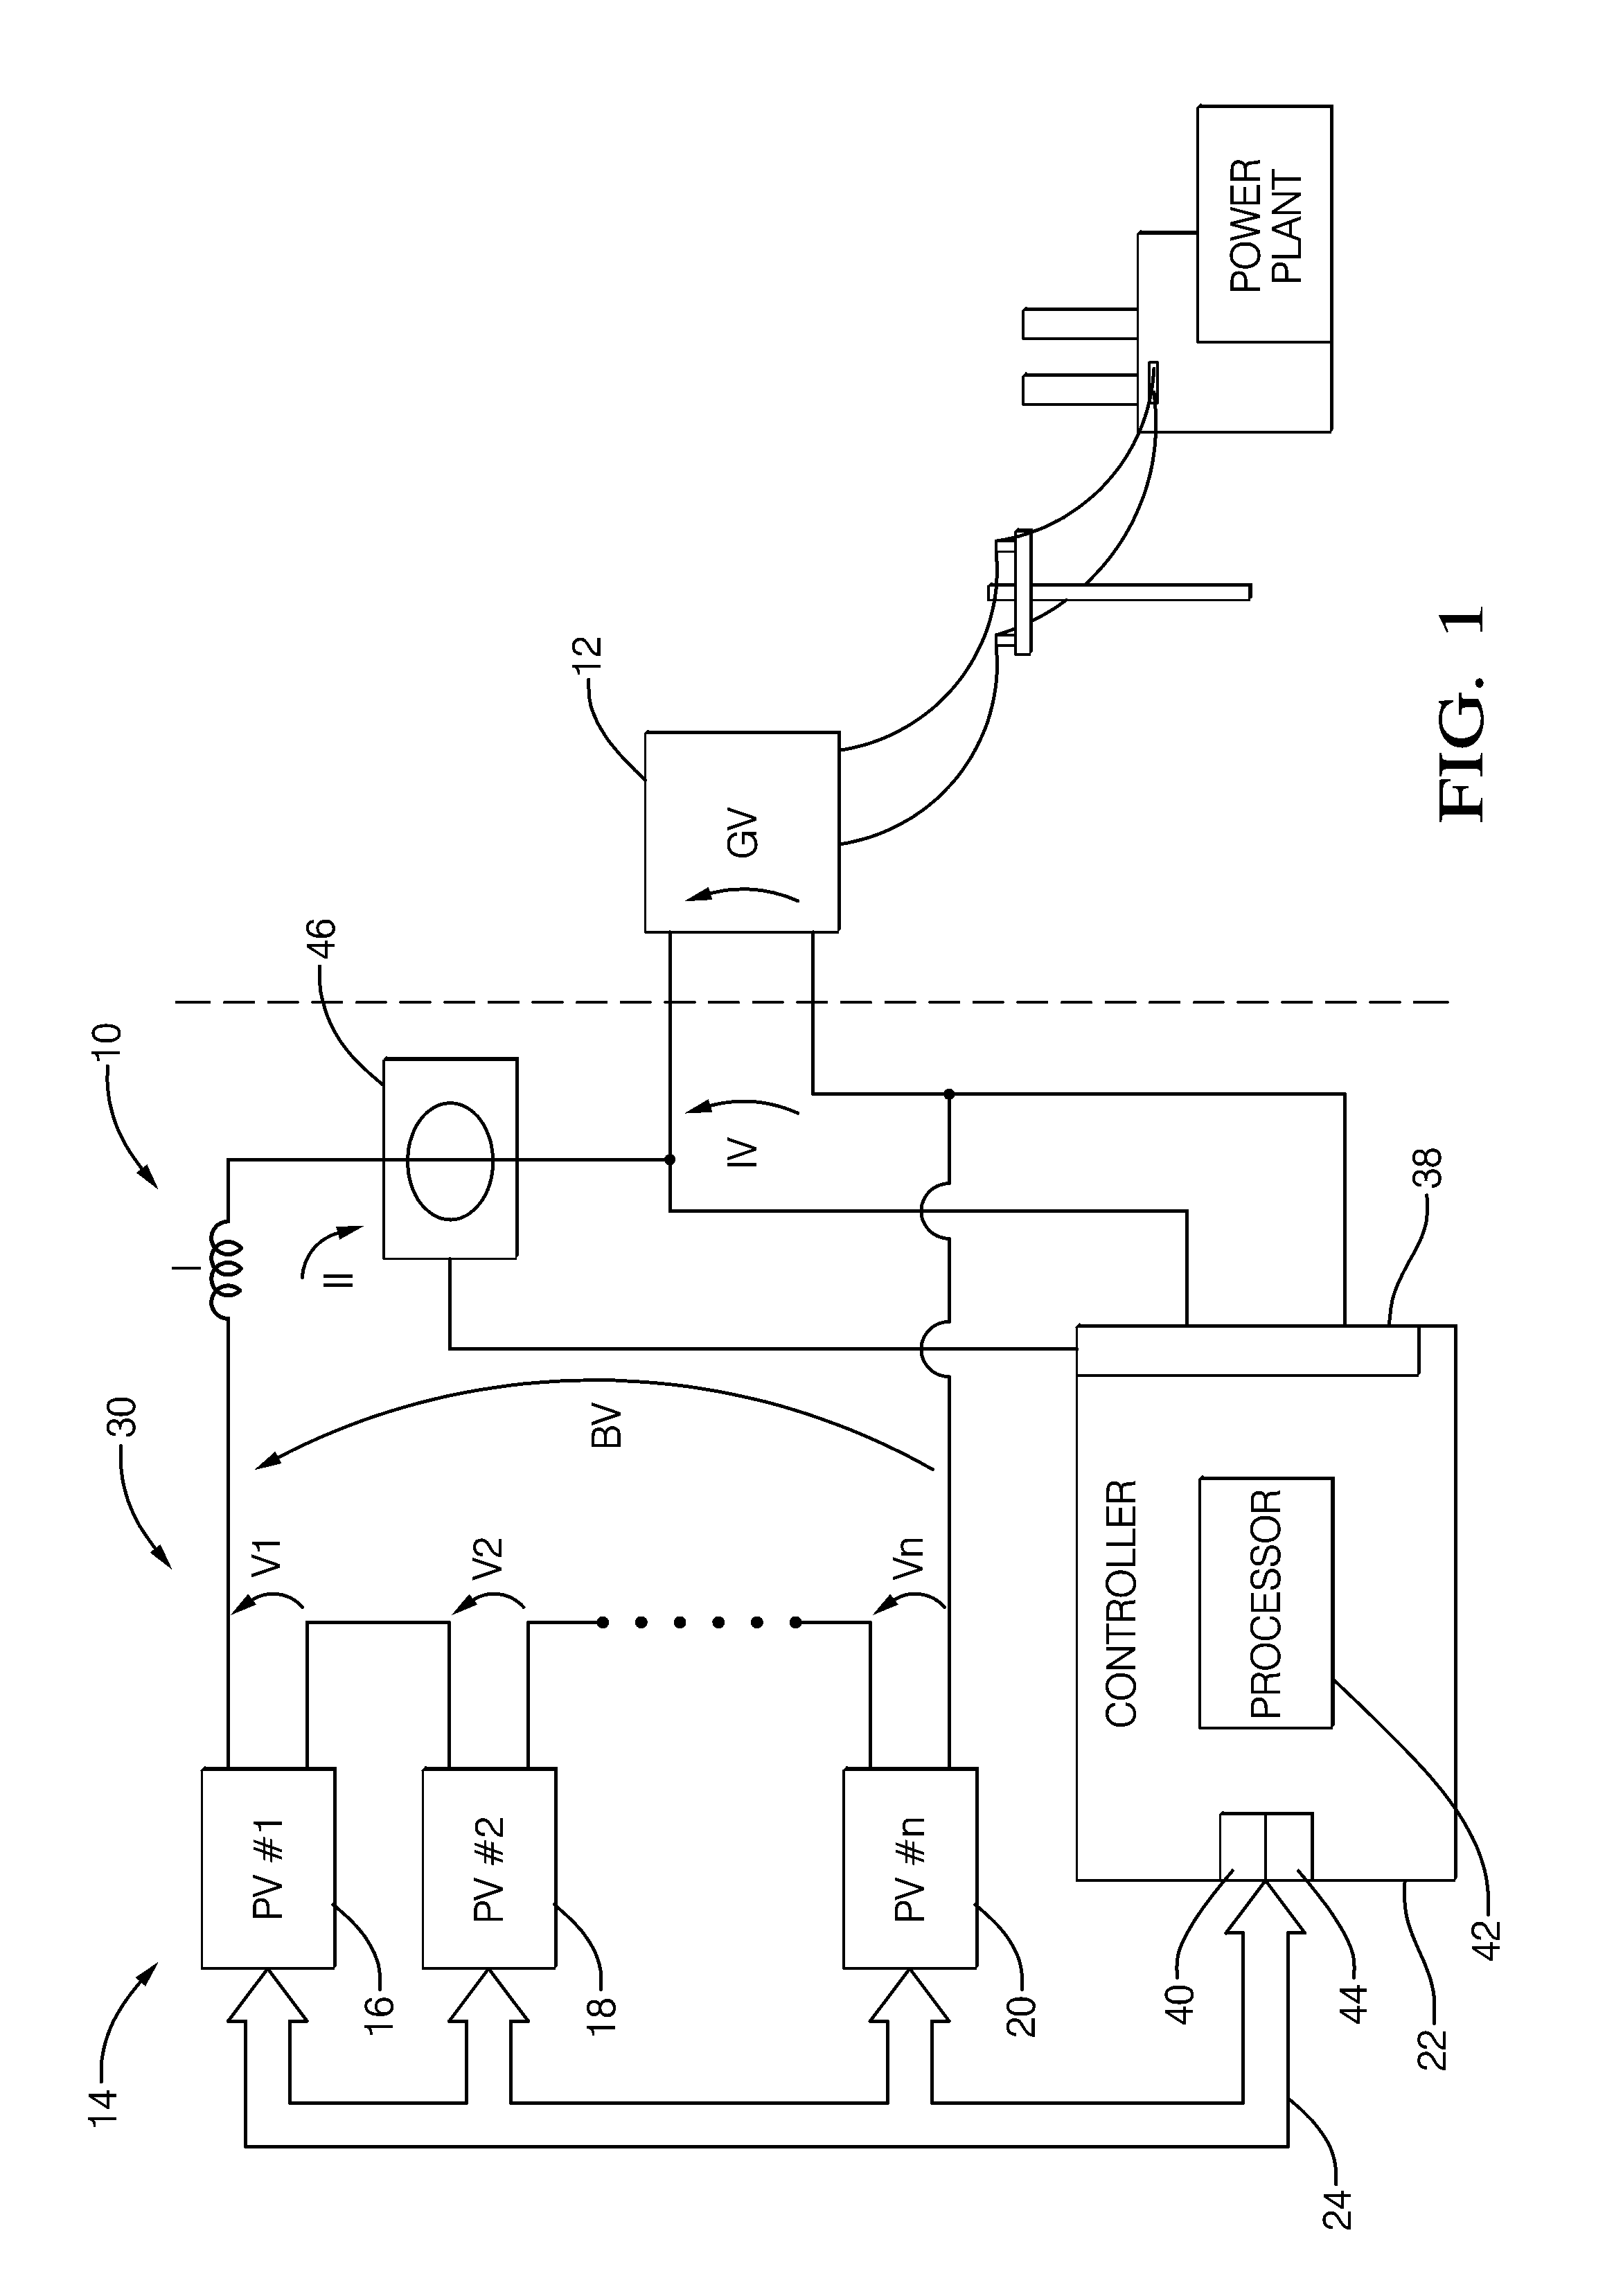 Cascaded multilevel inverter and method for operating photovoltaic cells at a maximum power point